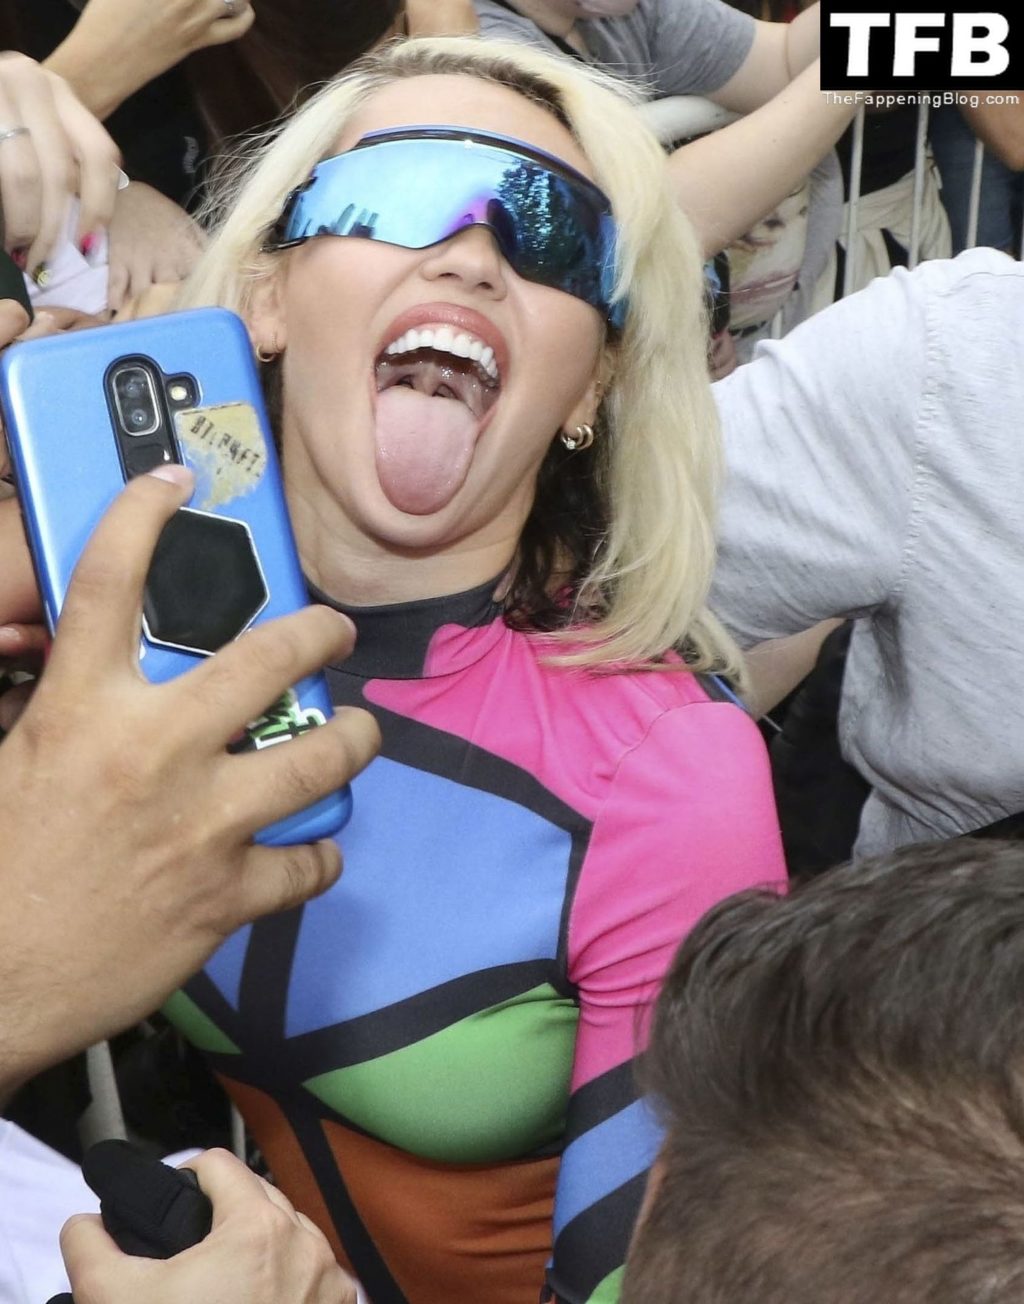 Miley Cyrus Sexy The Fappening Blog 7 1 1024x1304 - Miley Cyrus Greets Her Fans as She Arrives in Argentina to Attend the Lollapalooza Festival (27 Photos)